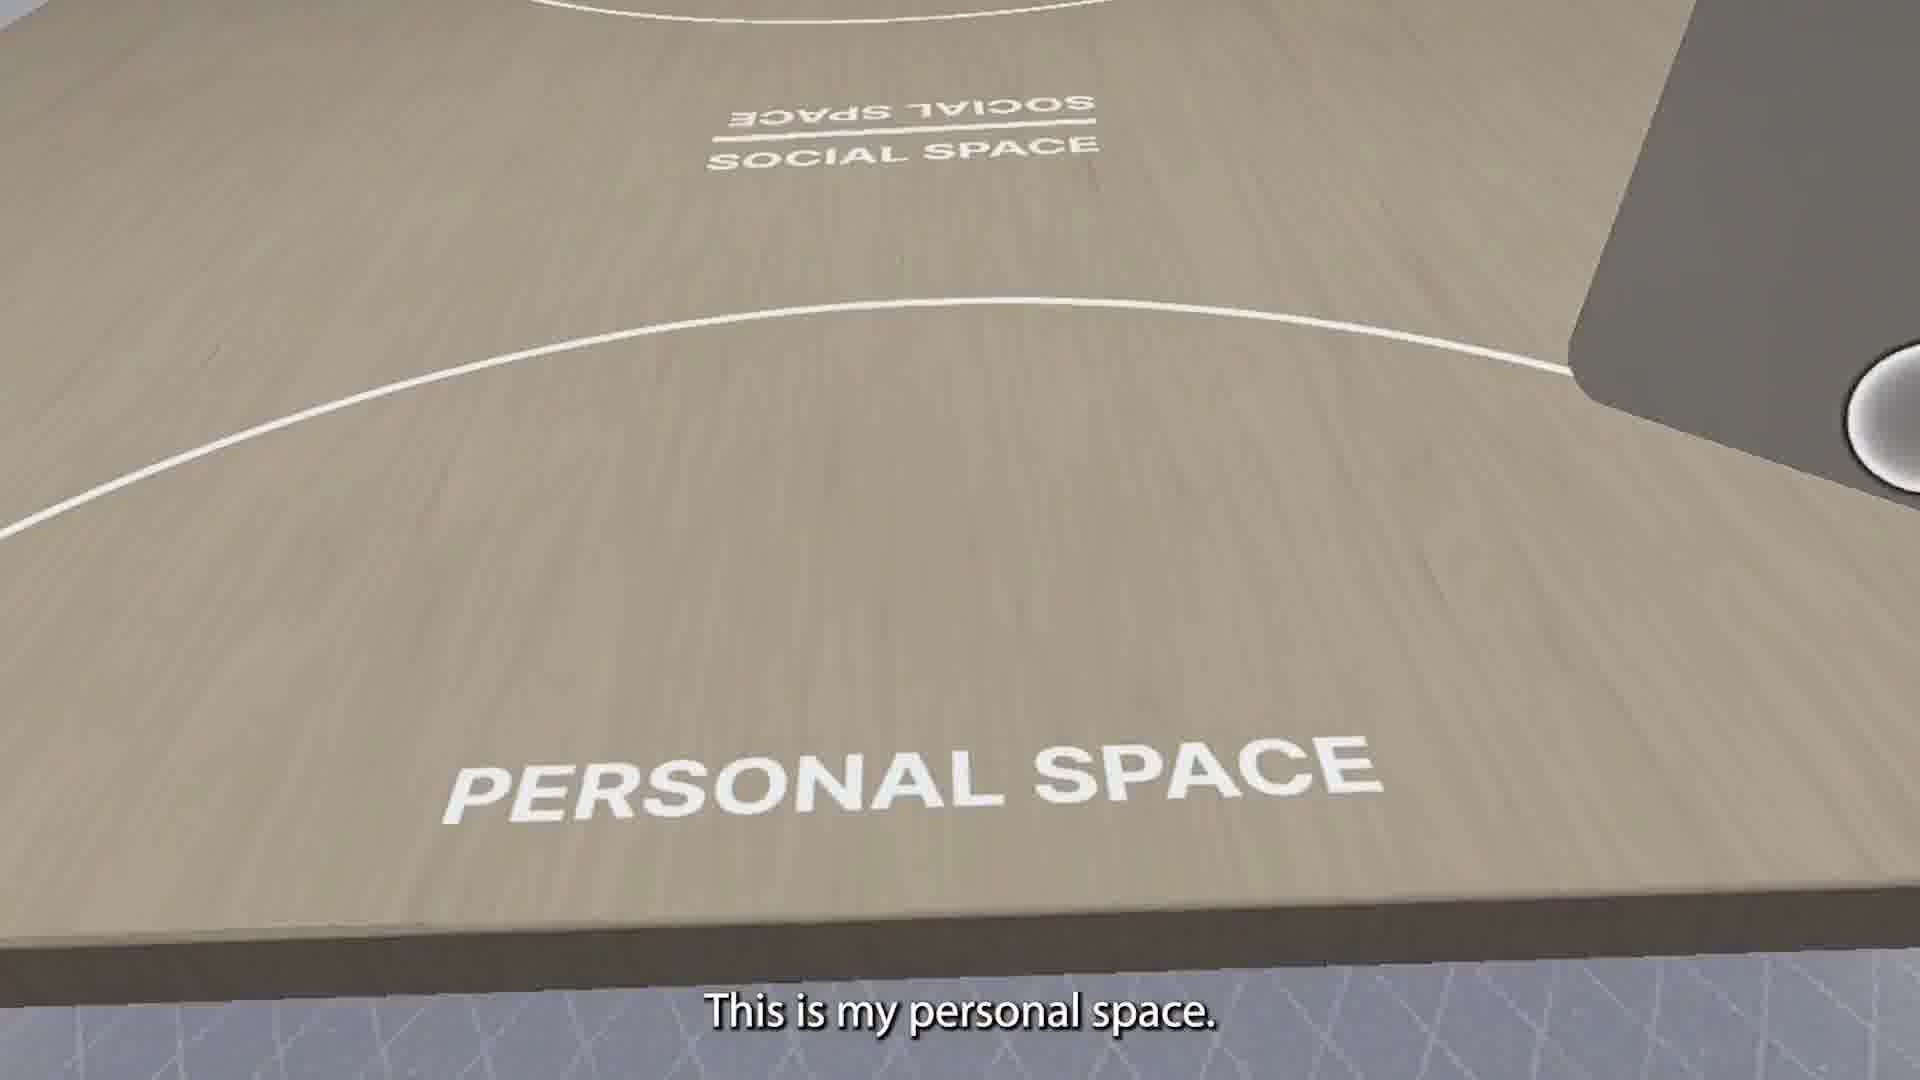 A close up of the personal space logo on a surface.